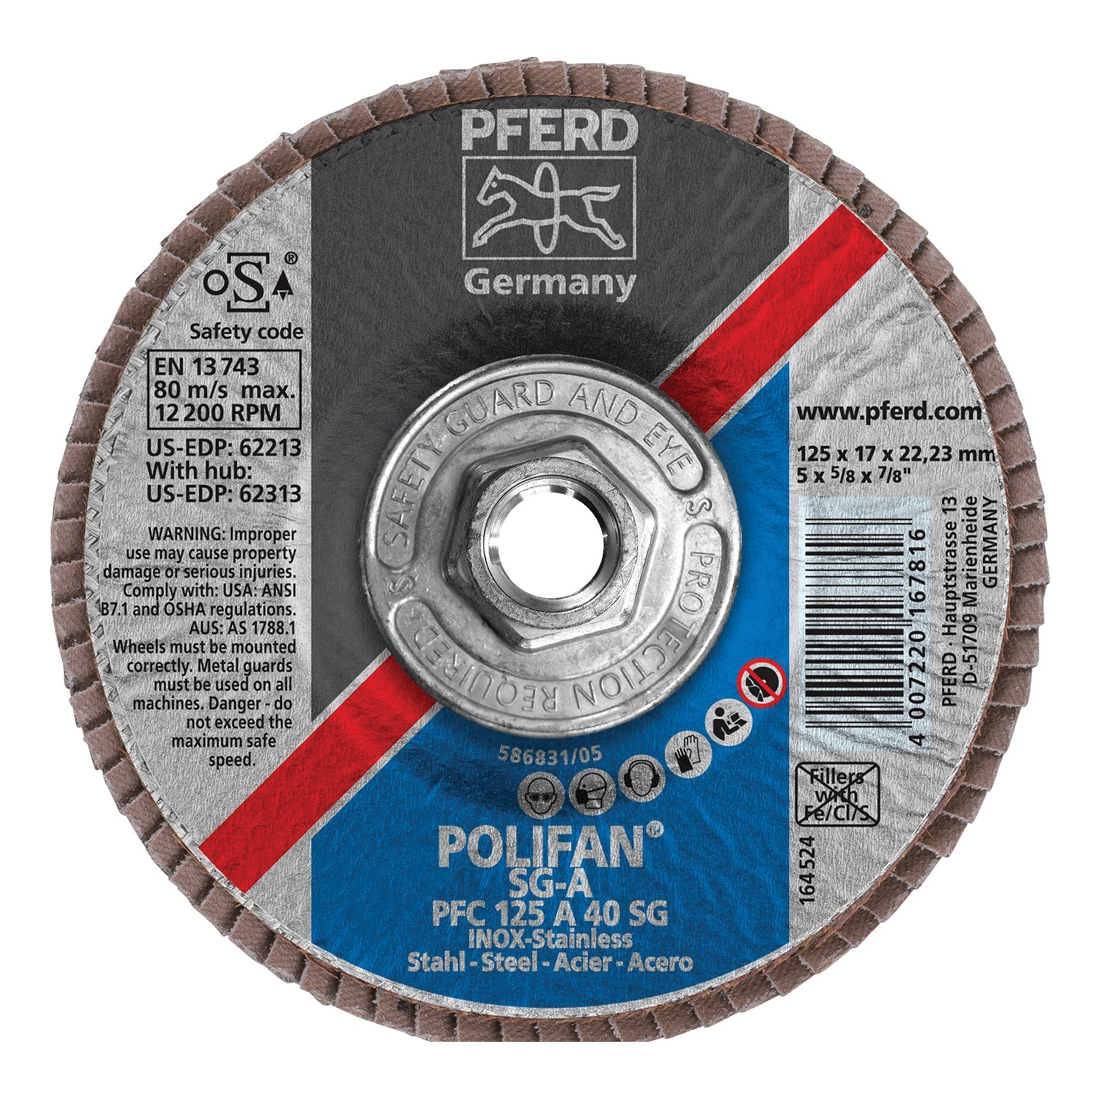 PFERD Polifan® 62313 Performance Line SG A Threaded Coated Abrasive Flap Disc, 5 in Dia, 40 Grit, Aluminum Oxide Abrasive, Type 29 Conical Disc